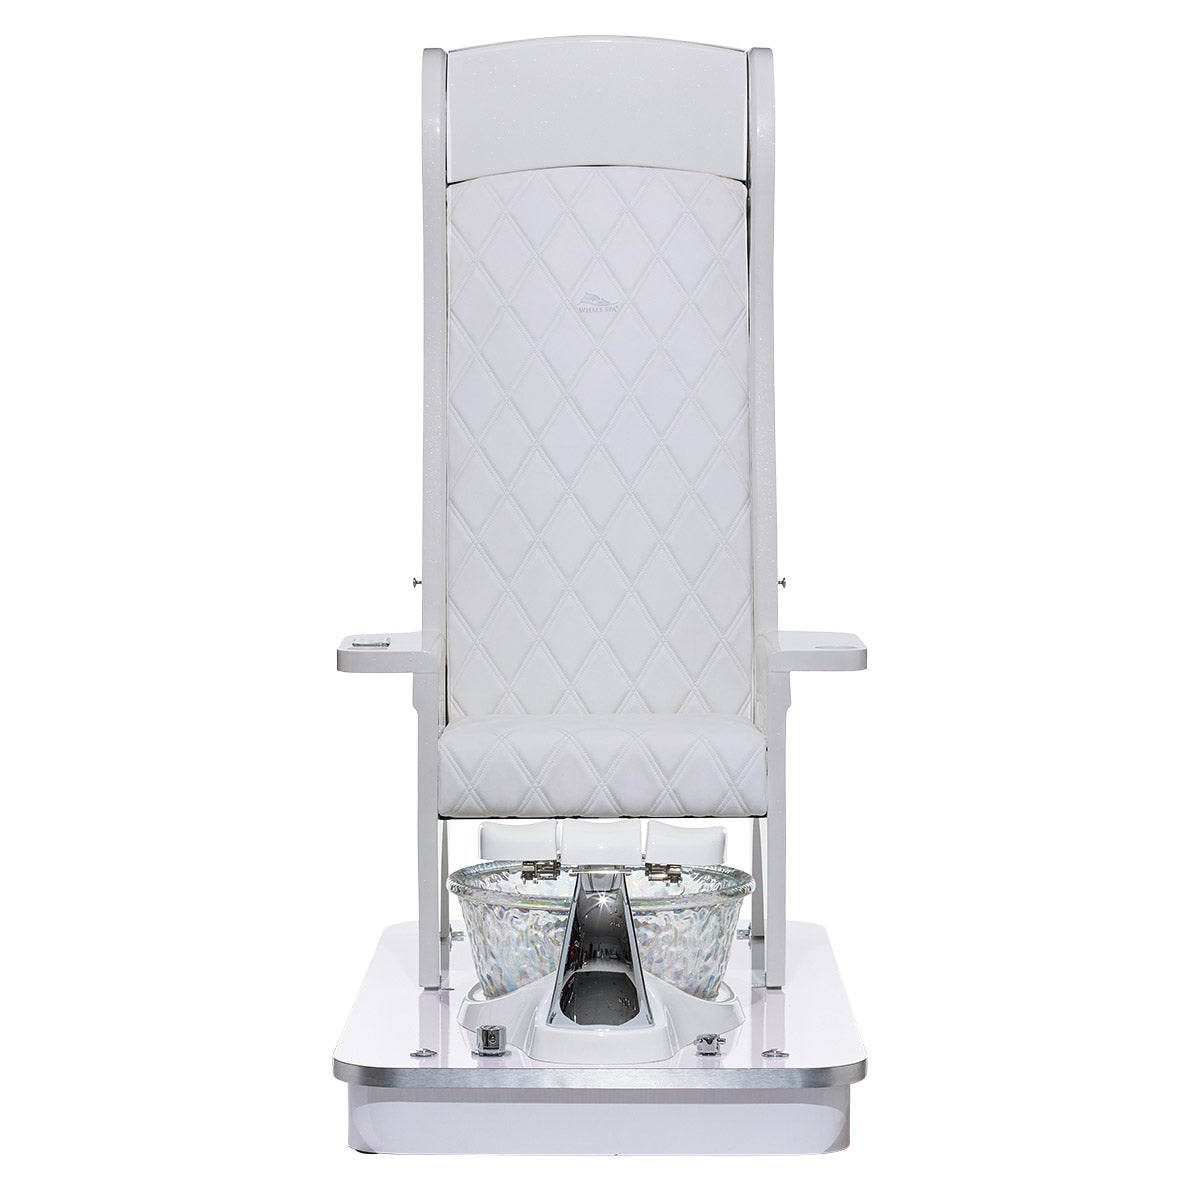 Monarch Pedicure Chair by V Beauty Pure - White 2